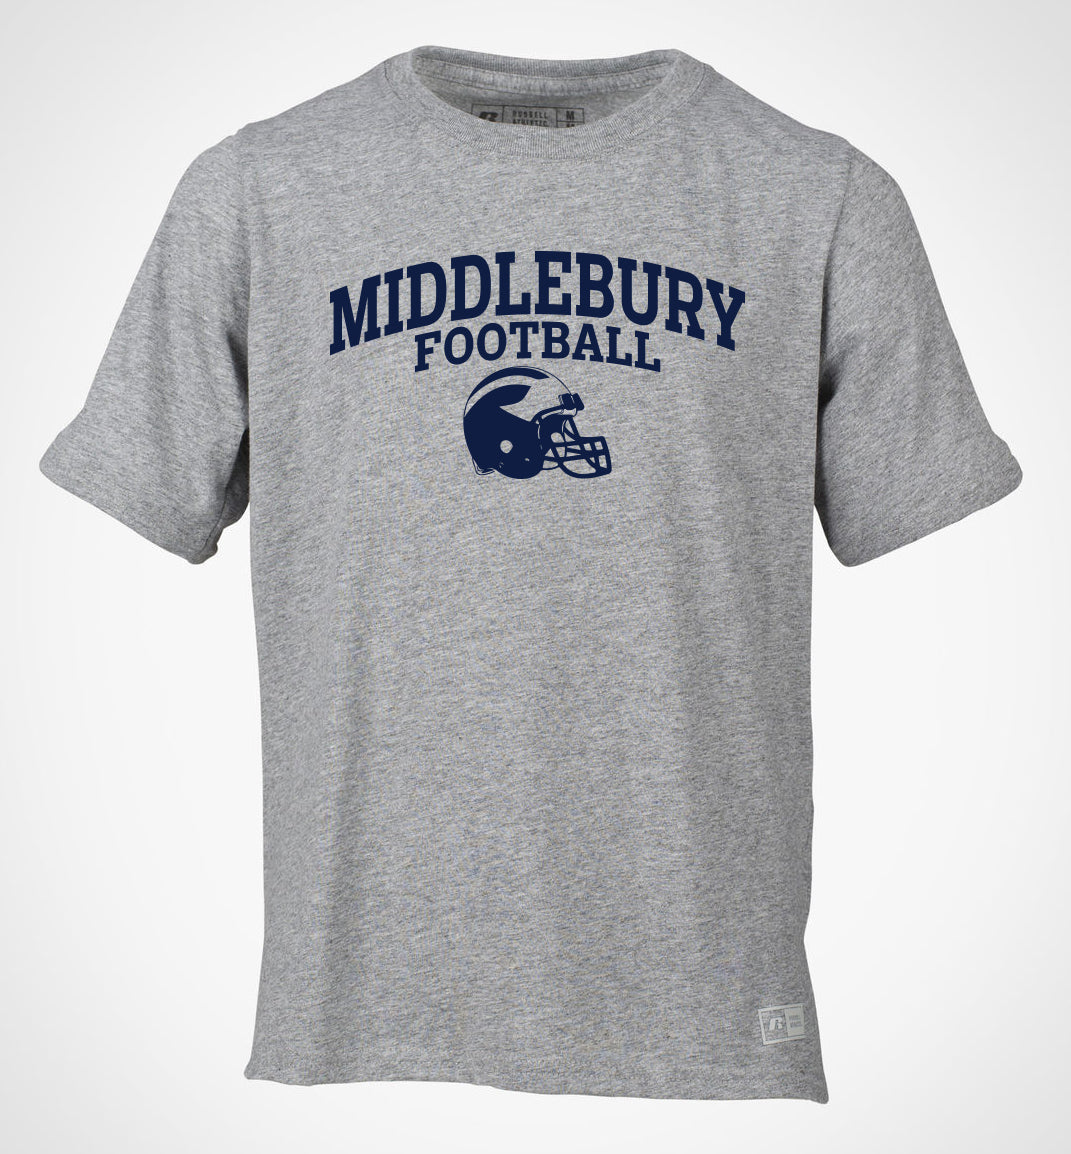 Middlebury College Football T-Shirt